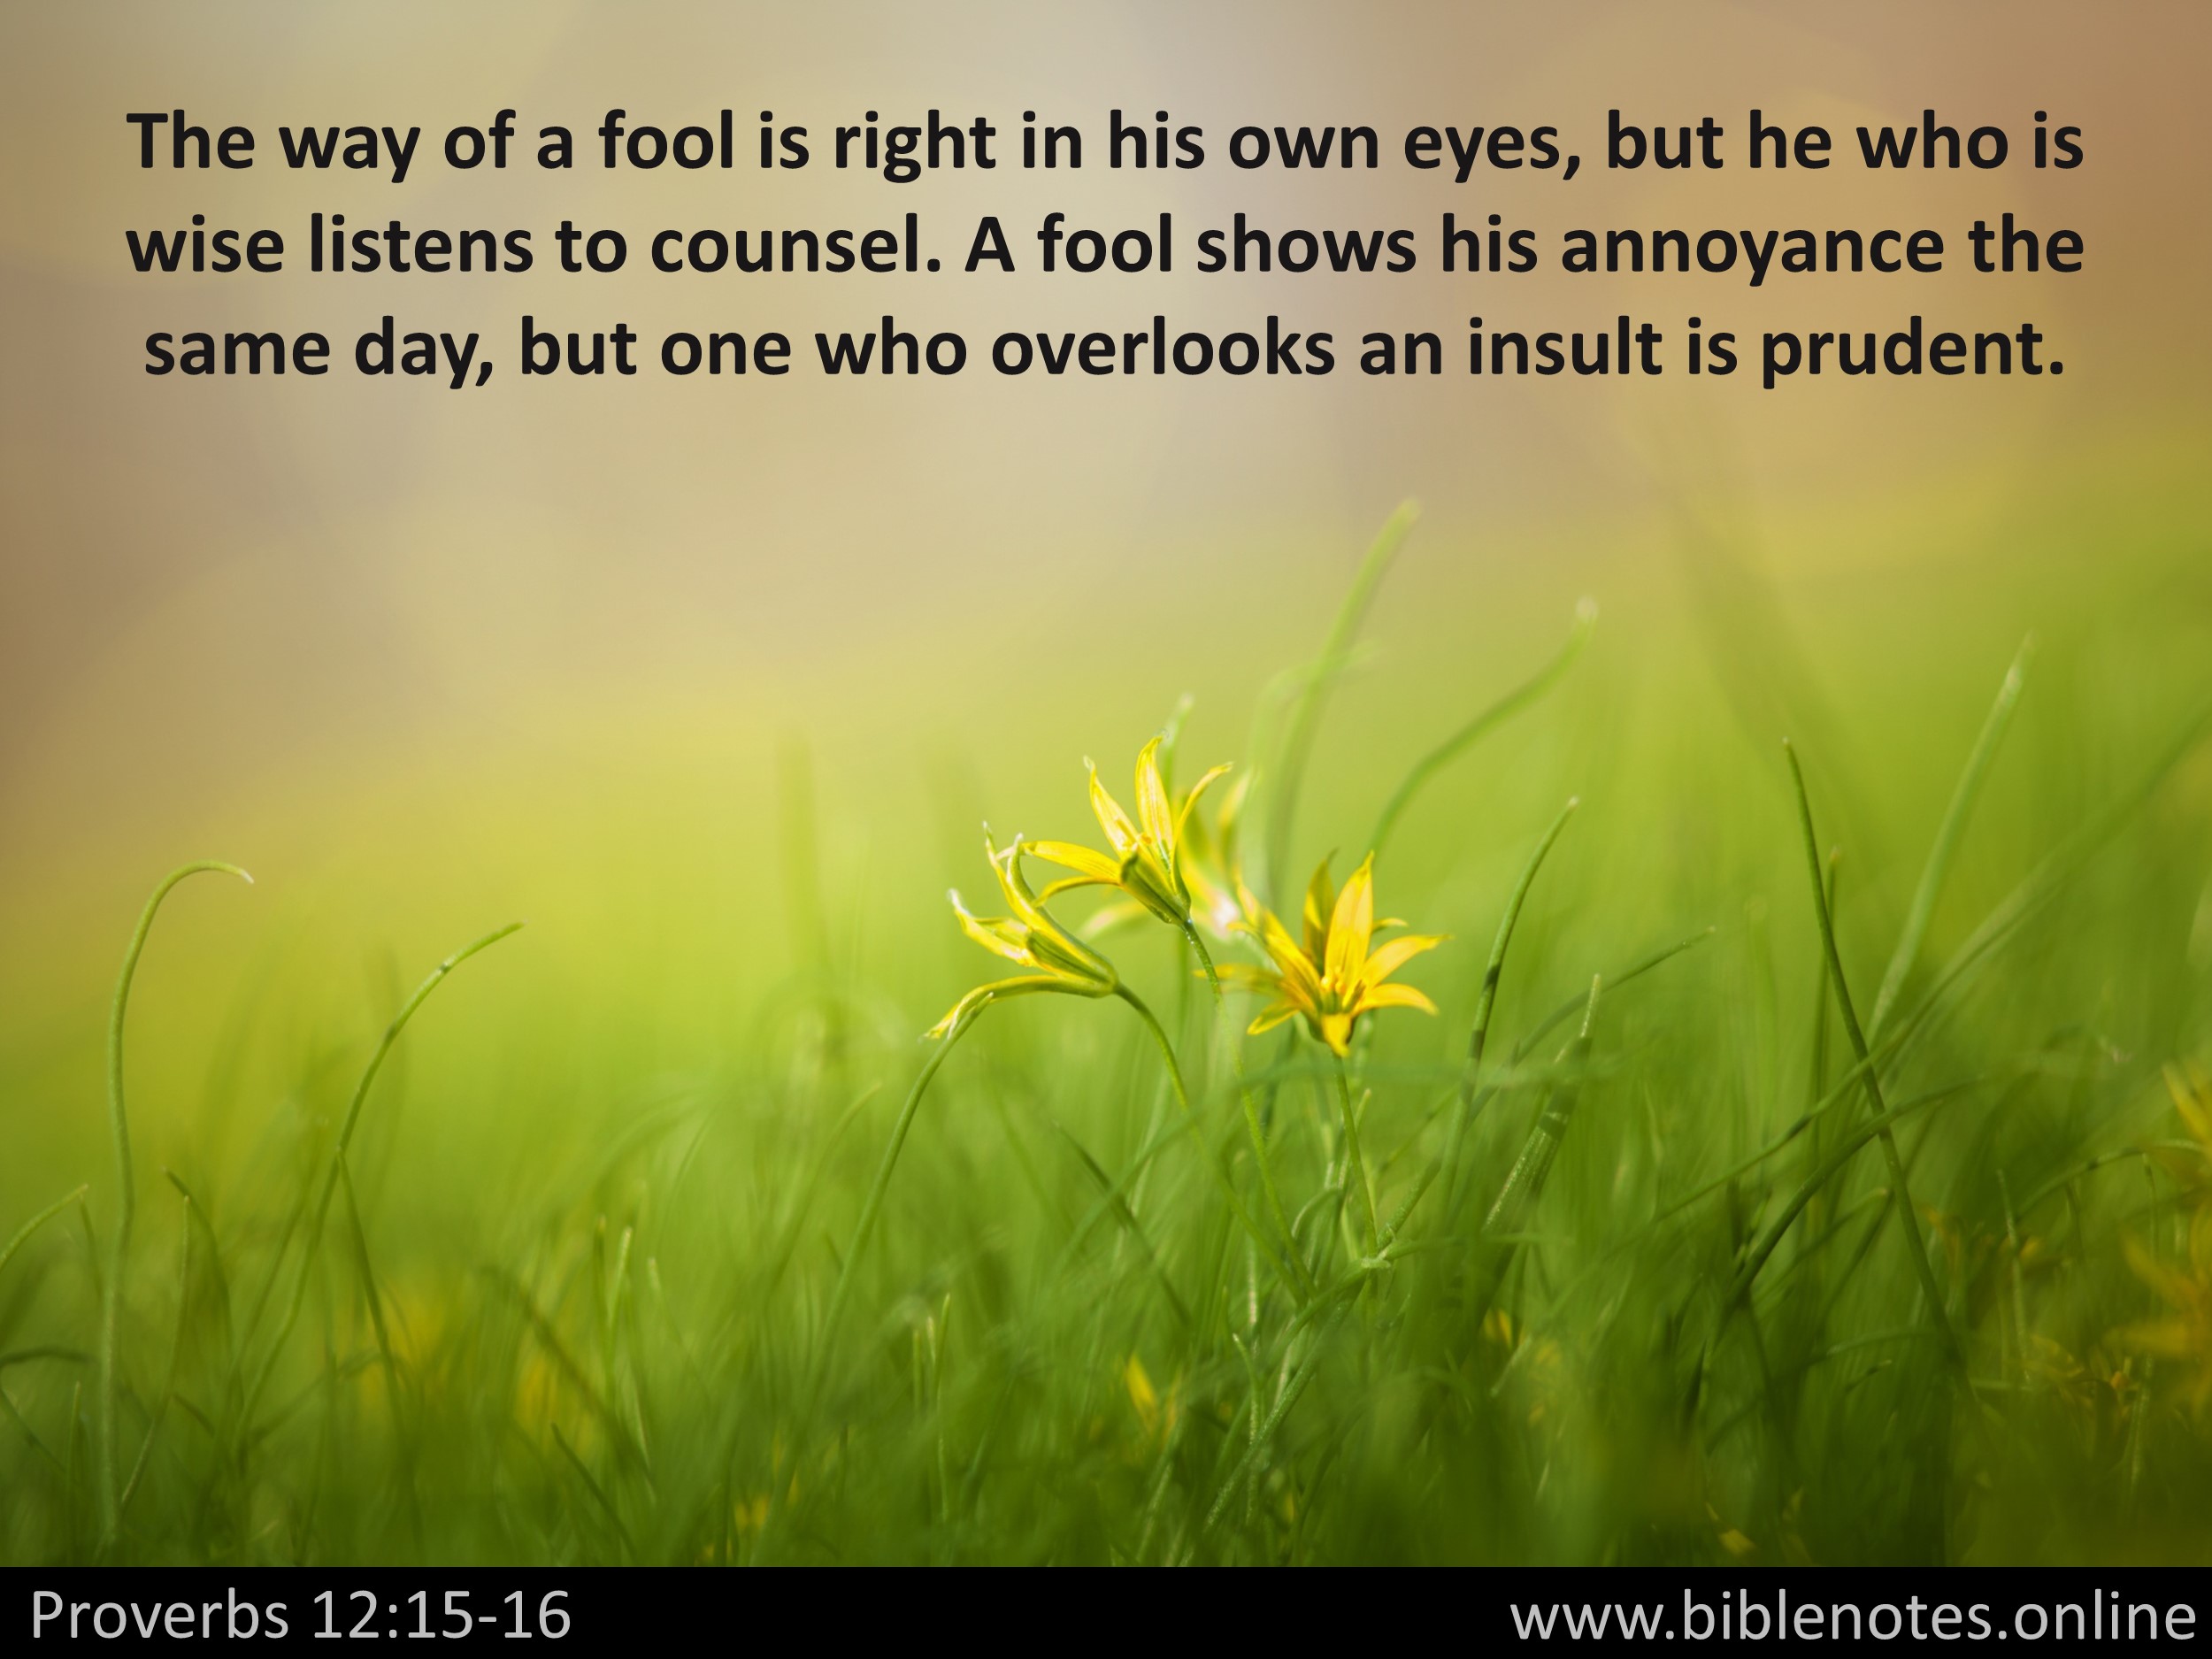 Bible Verse from Proverbs Chapter 12